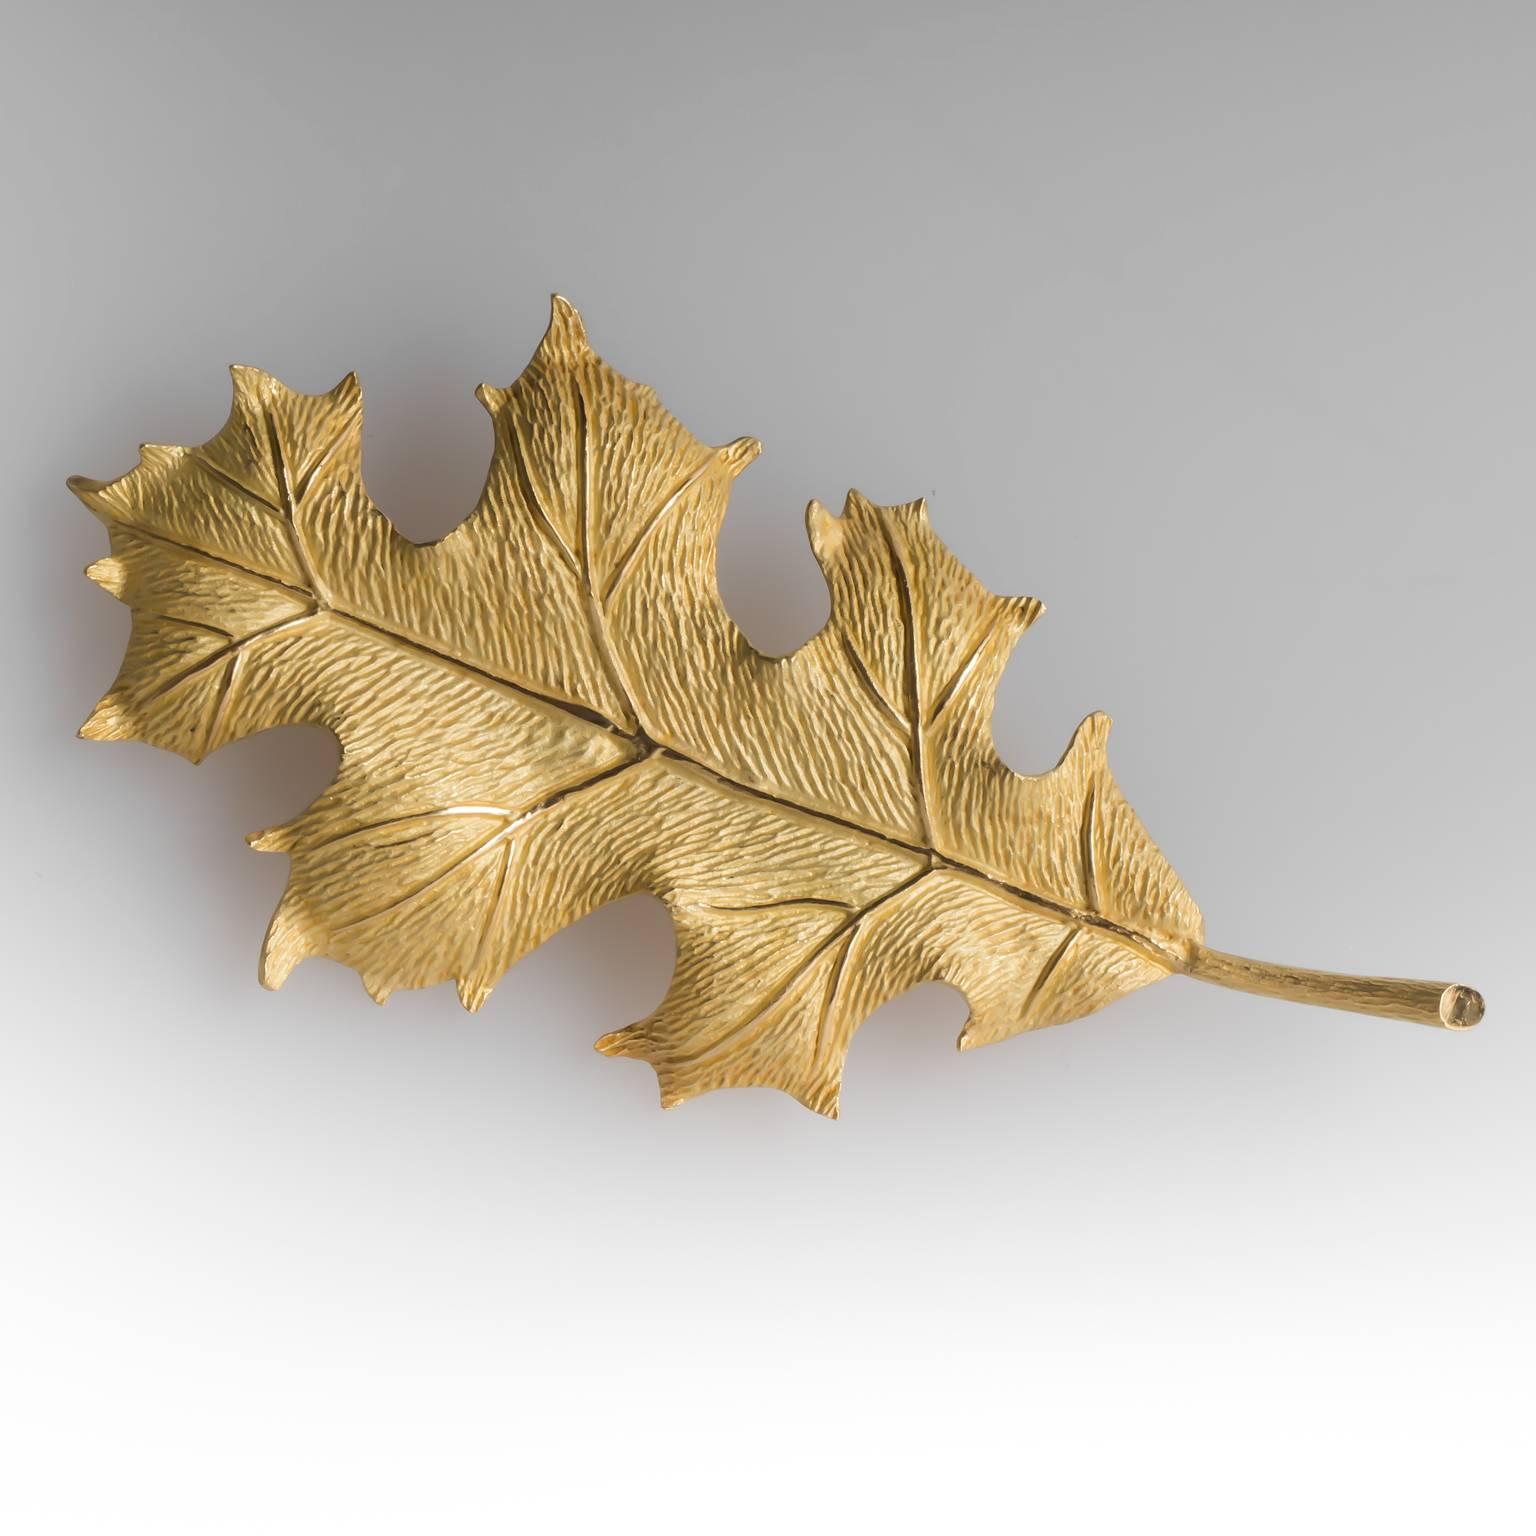 This Tiffany & Co oak leaf brooch pin is crafted of solid 18k gold and has lifelike details.